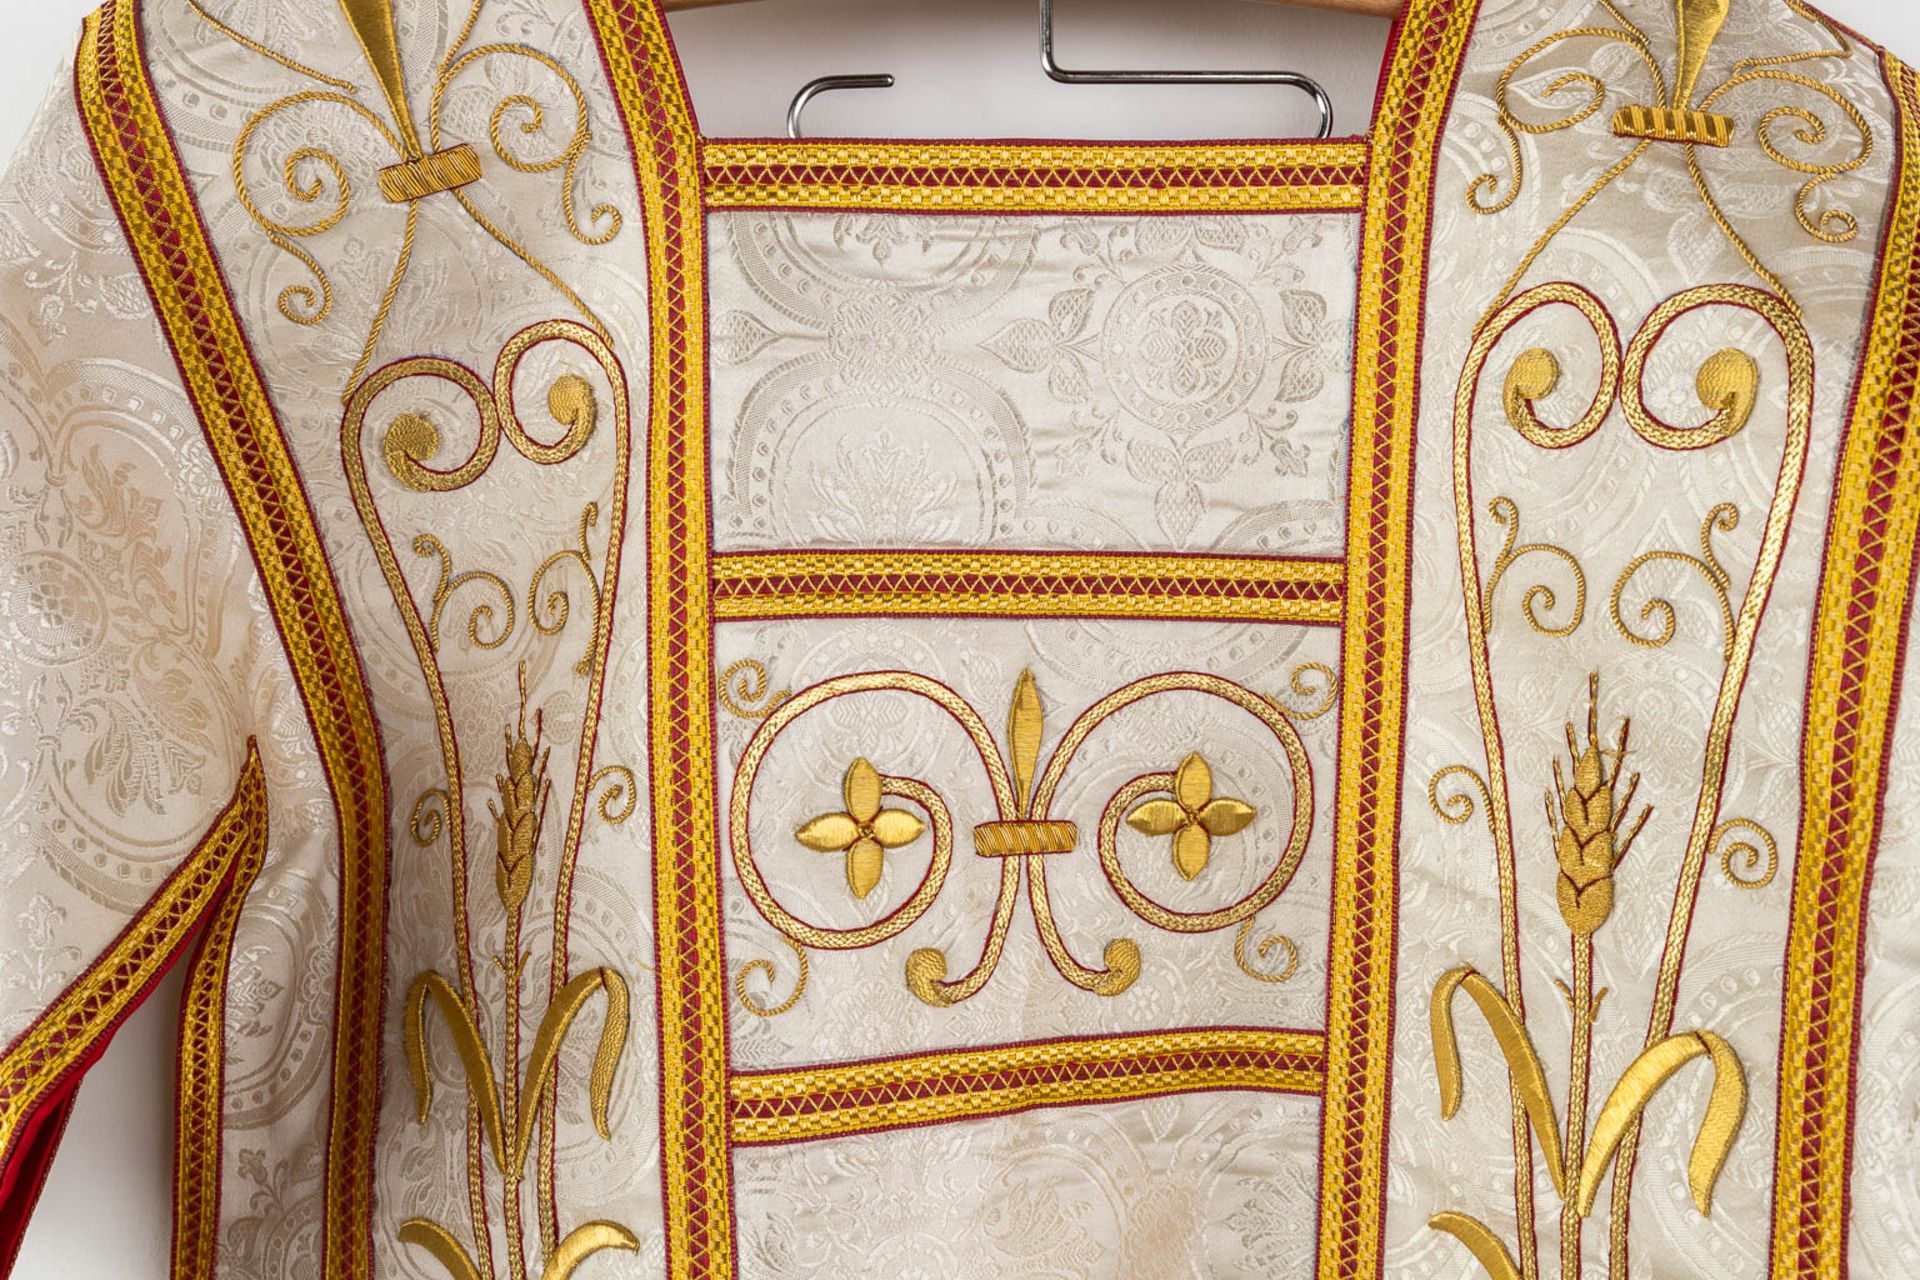 A matching set of Liturgical robes, 4 dalmatics, maniples and stola. - Image 3 of 17